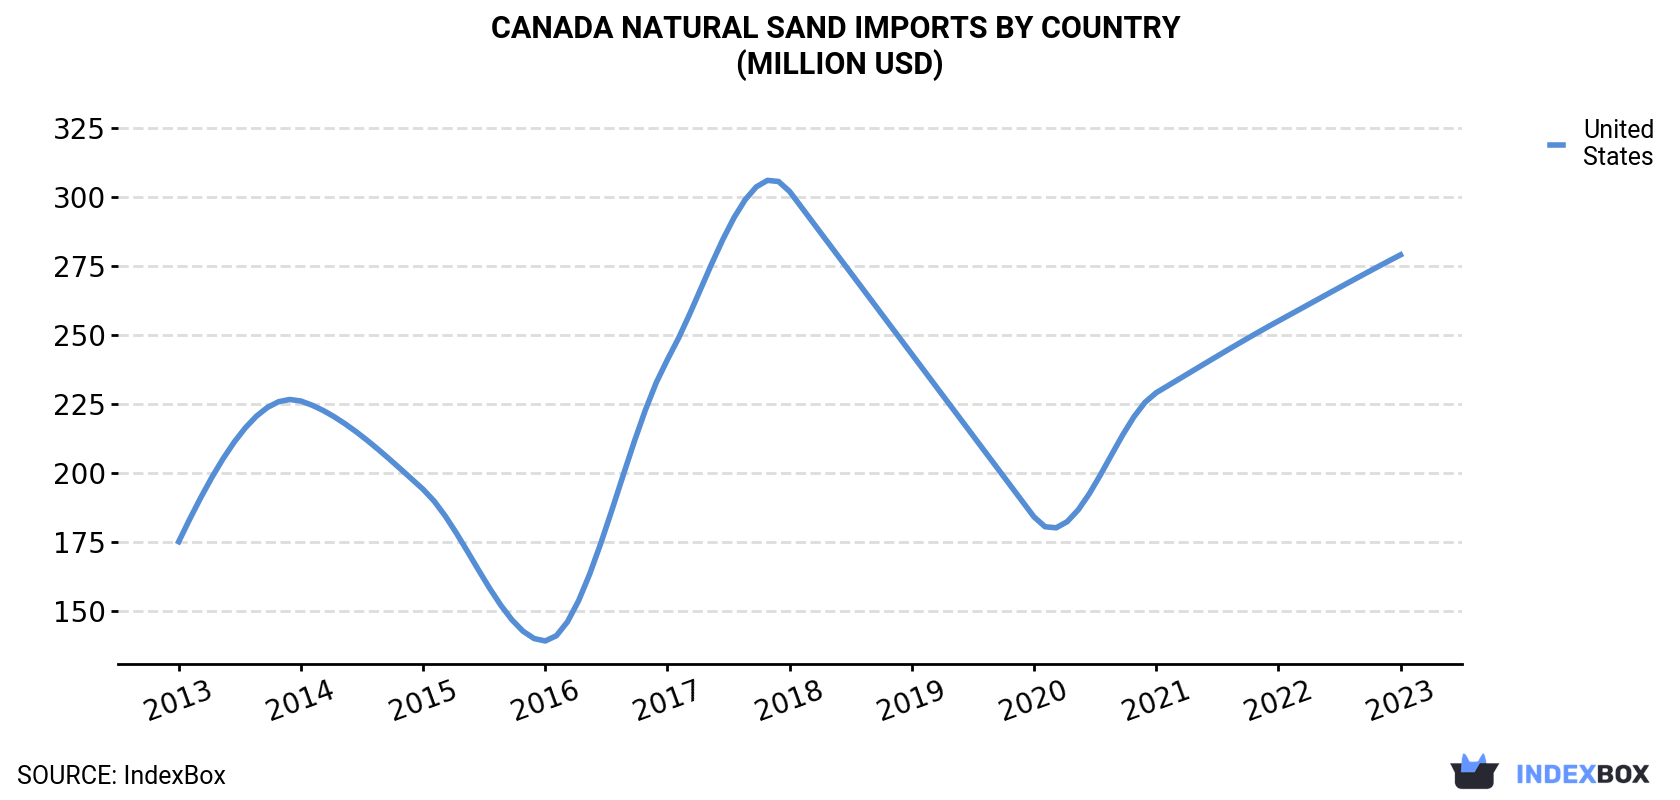 Canada Natural Sand Imports By Country (Million USD)